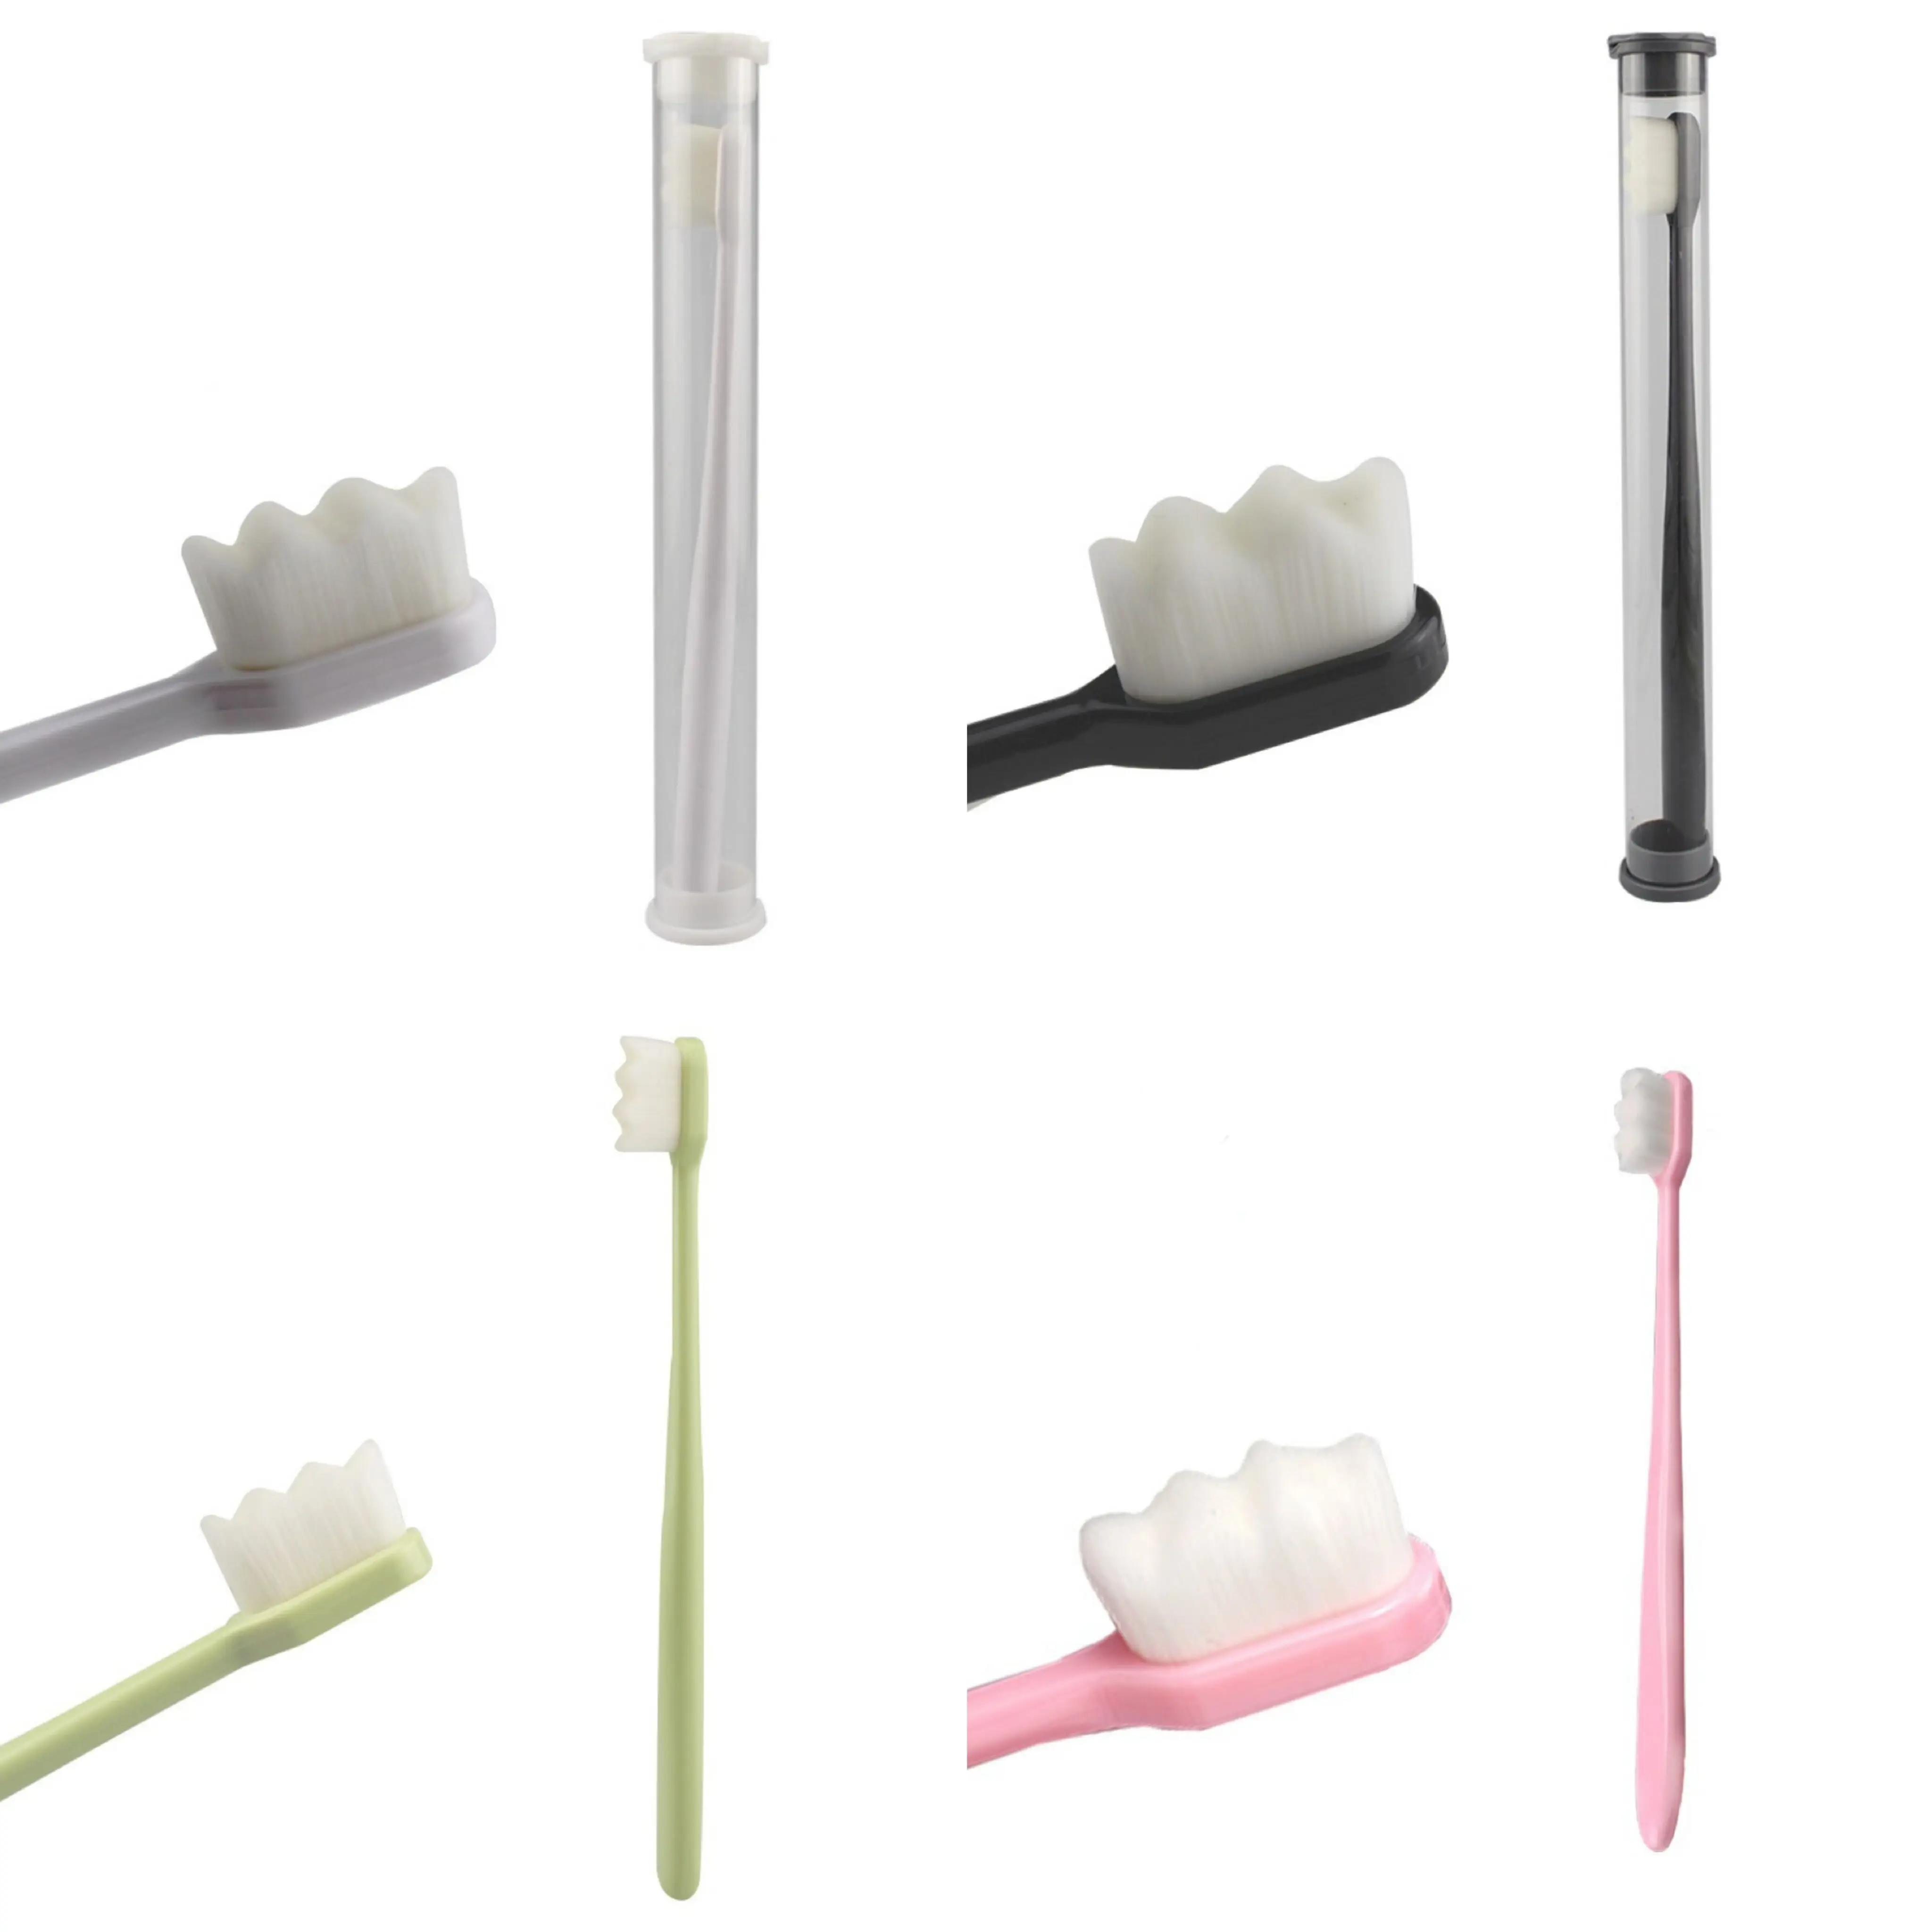 

4 Pieces Extra Soft Toothbrush for Sensitive Gums and Teeth. Micro Nano Toothbrushes With 12,000 Bamboo Charcoal Bristles